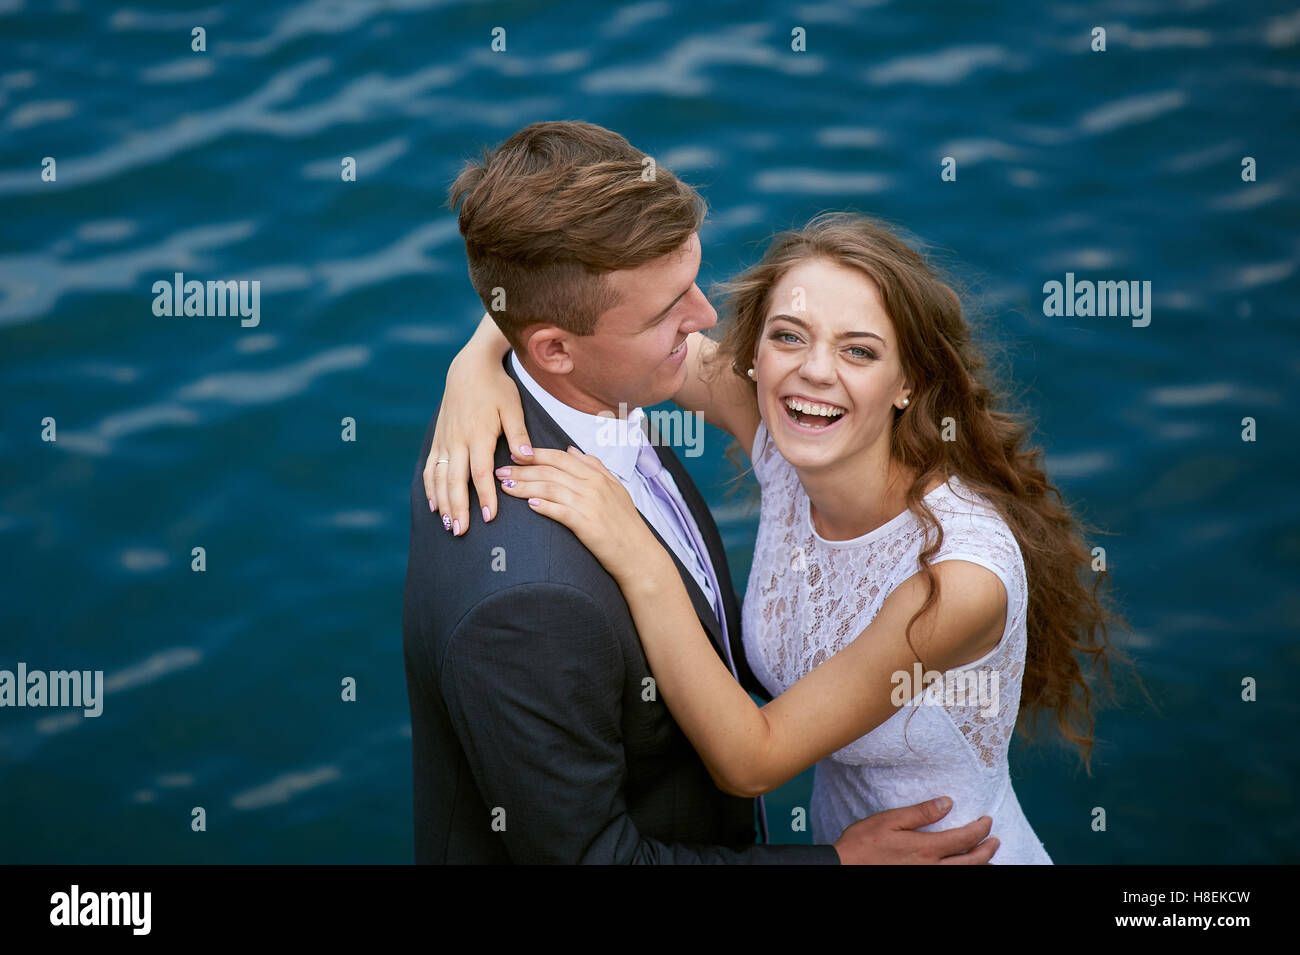 bride and groom hugging at the background of water Stock Photo